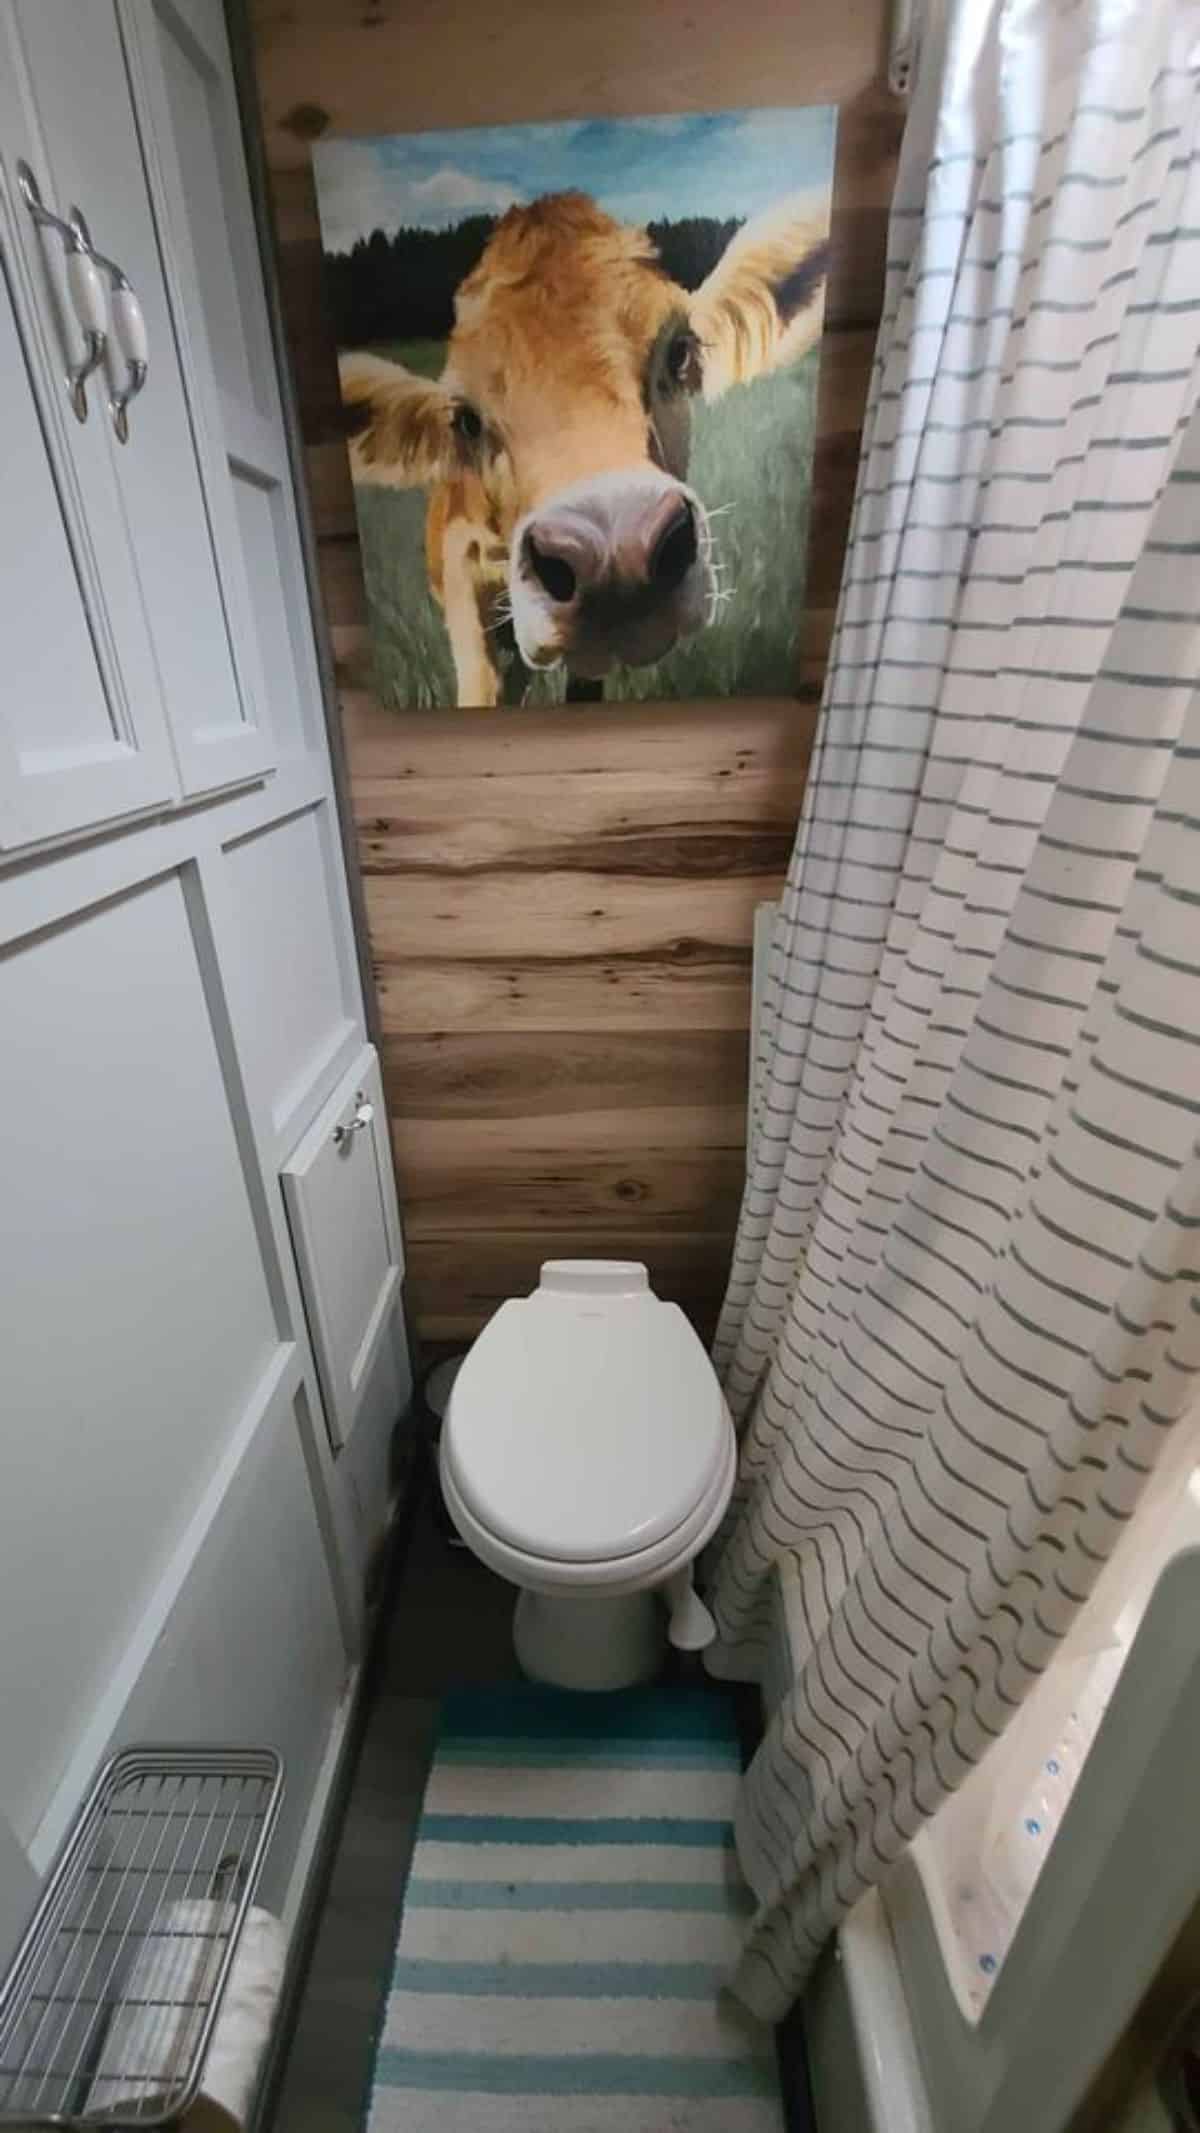 Standard toilet in bathroom of remodeled tiny home